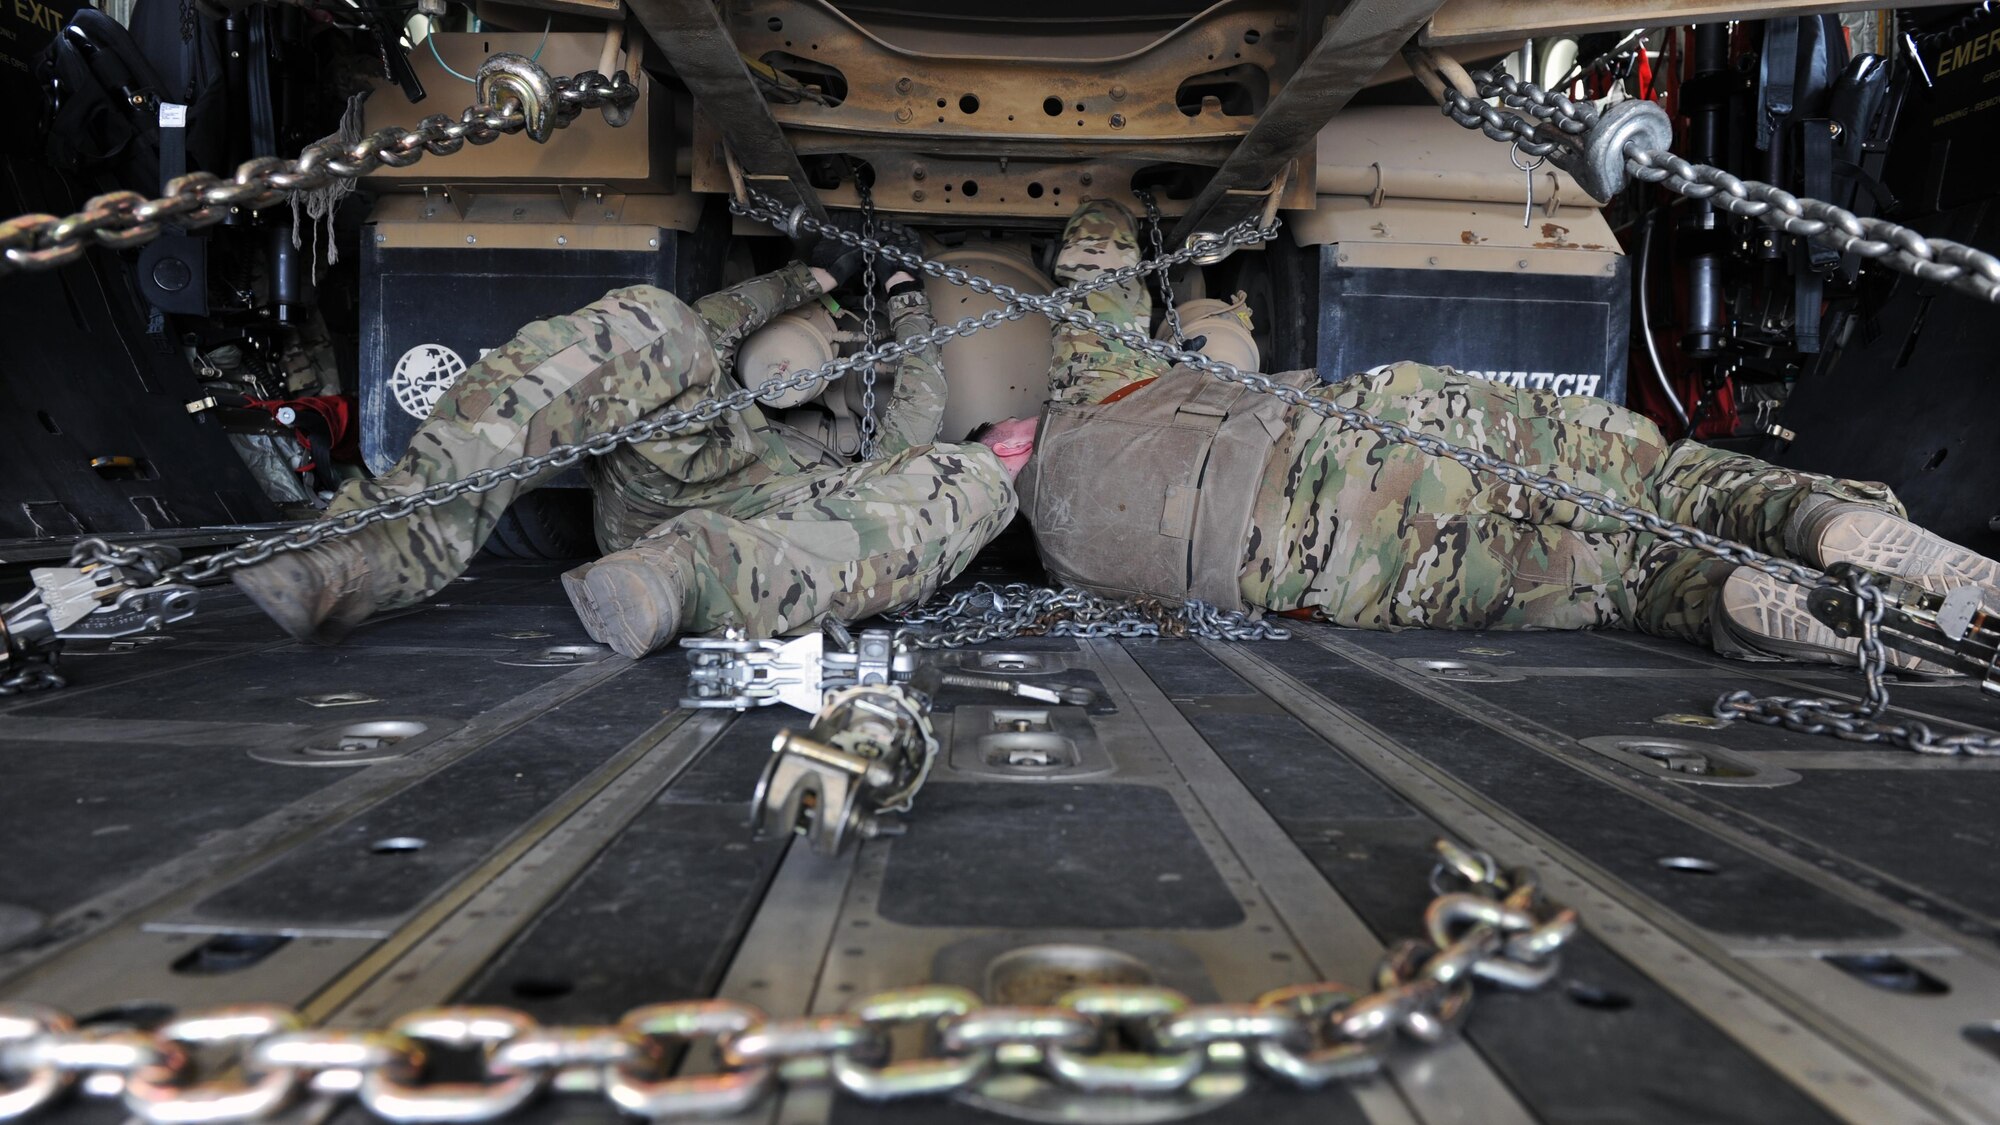 U.S. Air Force Senior Airman Kyle Bennett and Airman 1st Class Kelly Mahoney, 774th Expeditionary Airlift Squadron loadmasters, secure an R-11 fuel truck to the cargo compartment on a C-130J Super Hercules aircraft during a redeployment mission at an undisclosed location in the Air Force Central Command area of responsibility March 15, 2015. The ability to forward deploy mission critical equipment, such as the R-11, to key sites throughout the AOR is more imperative than ever before as the Air Force reduces its footprint in the region. (U.S. Air Force photo by Staff Sgt. Whitney Amstutz)